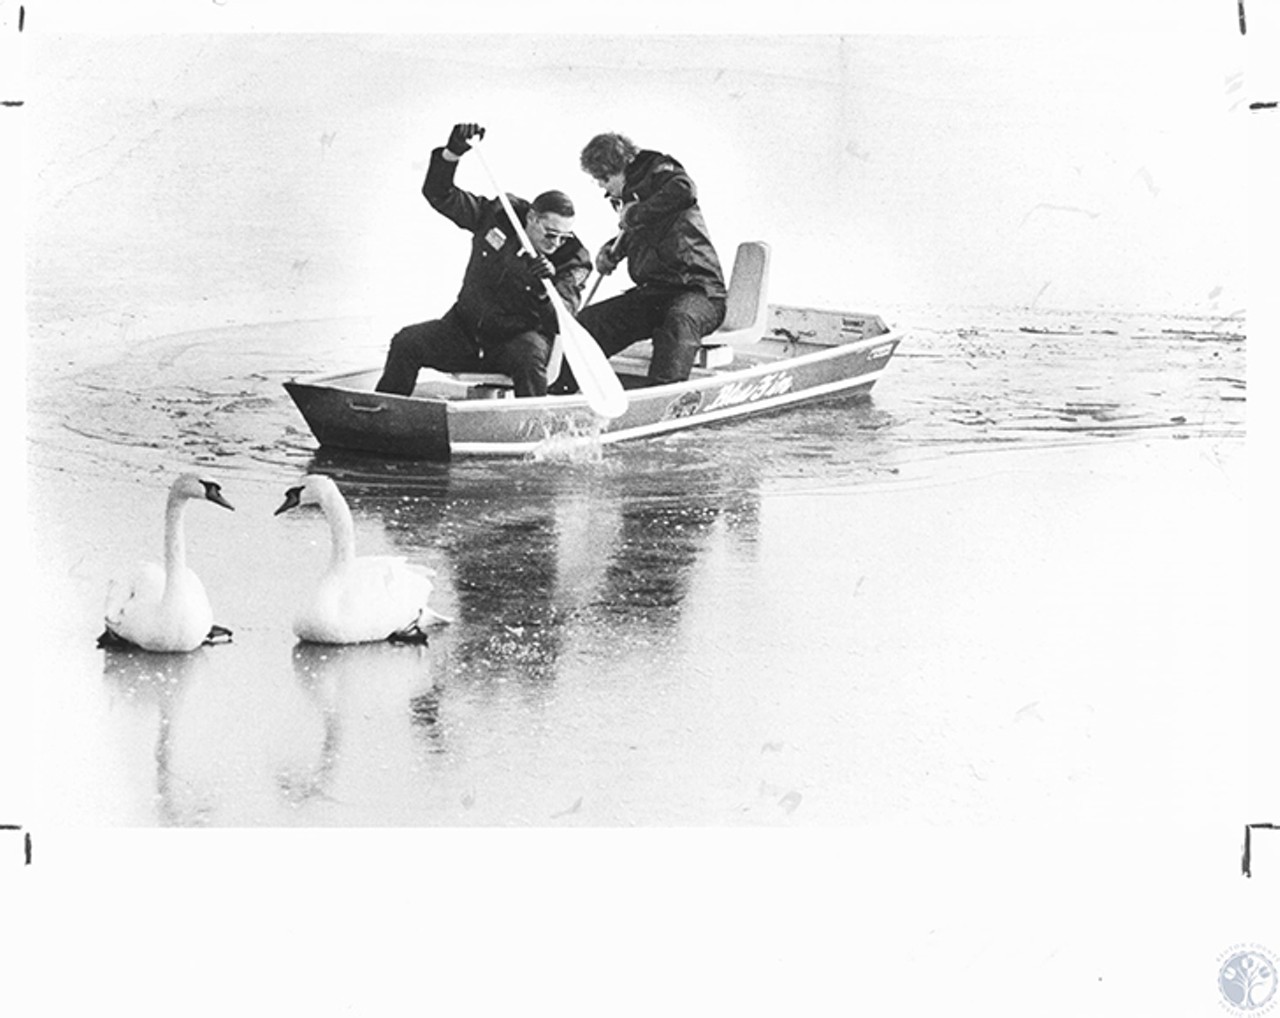 Florence
"Ron Bitter and Daryl Sears remove geese from ice in lake in front of Cindus Corp"